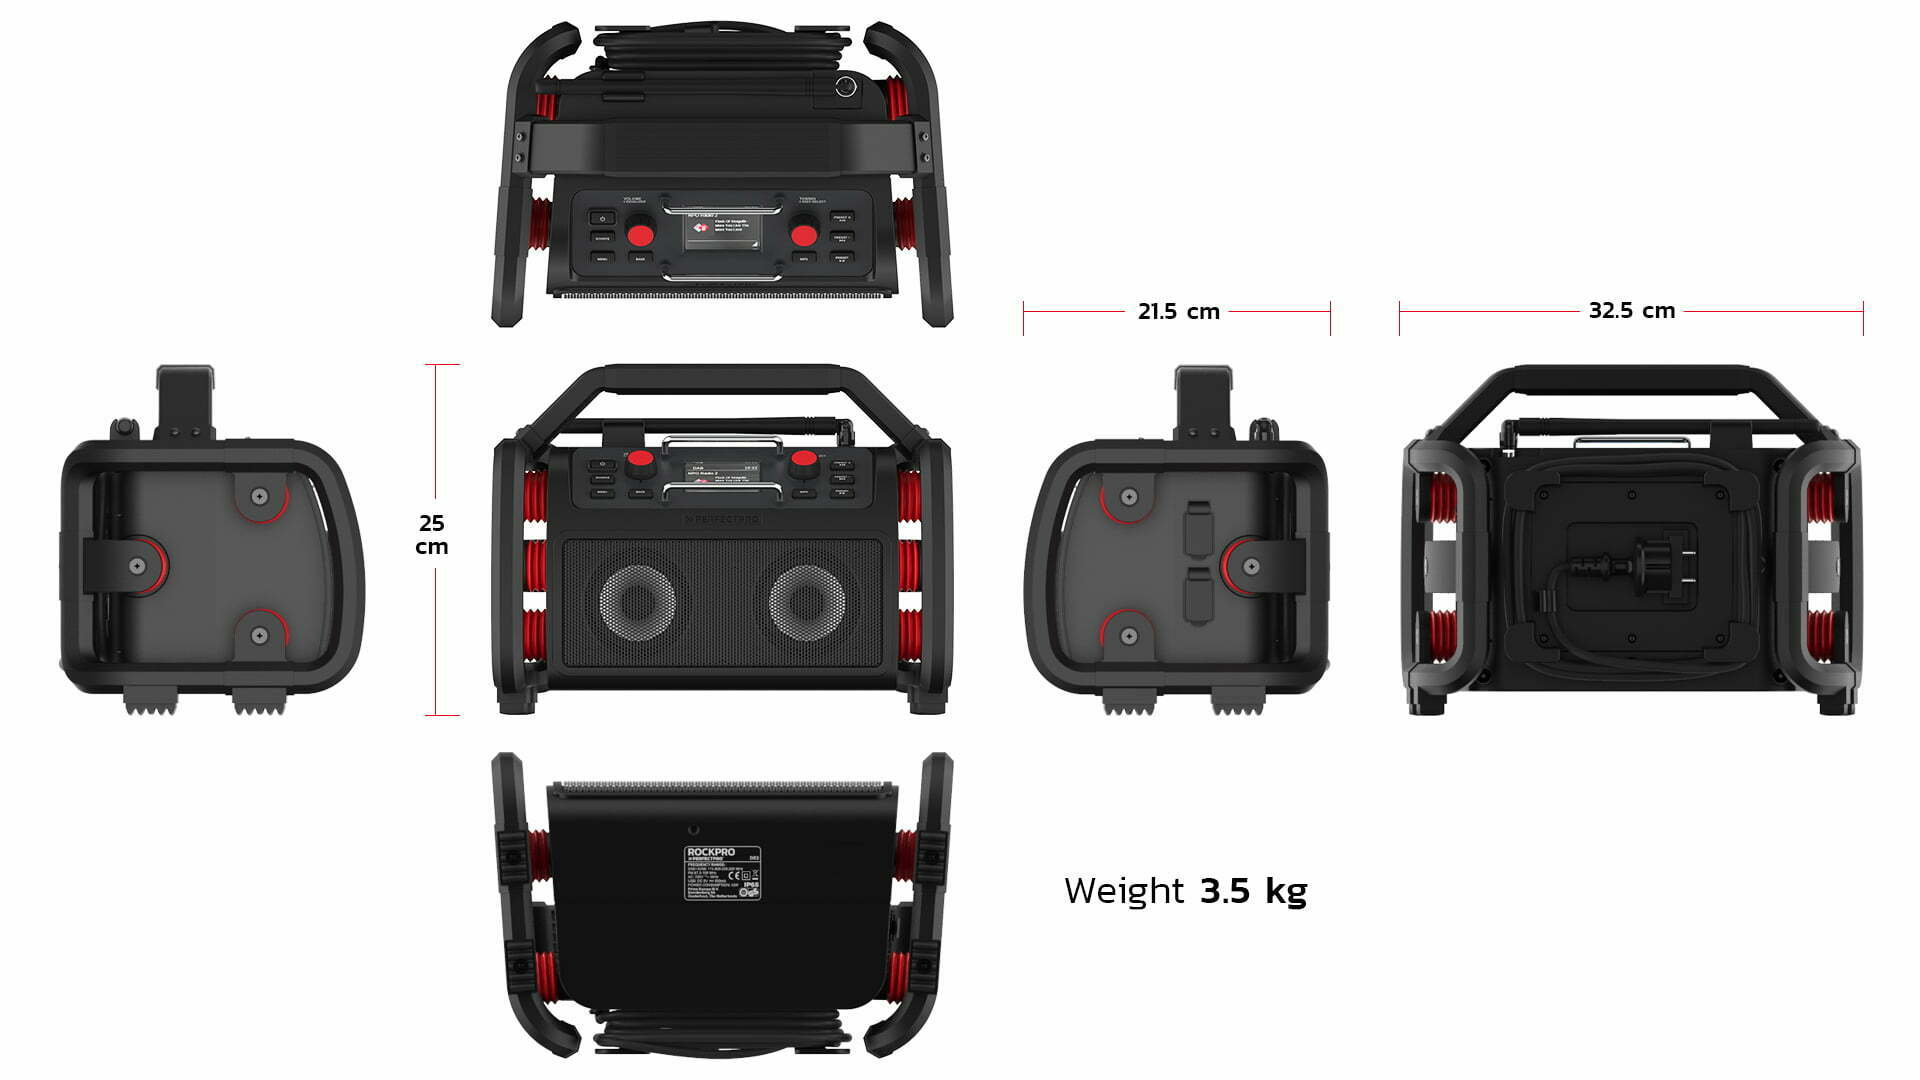 Rockpro specifications